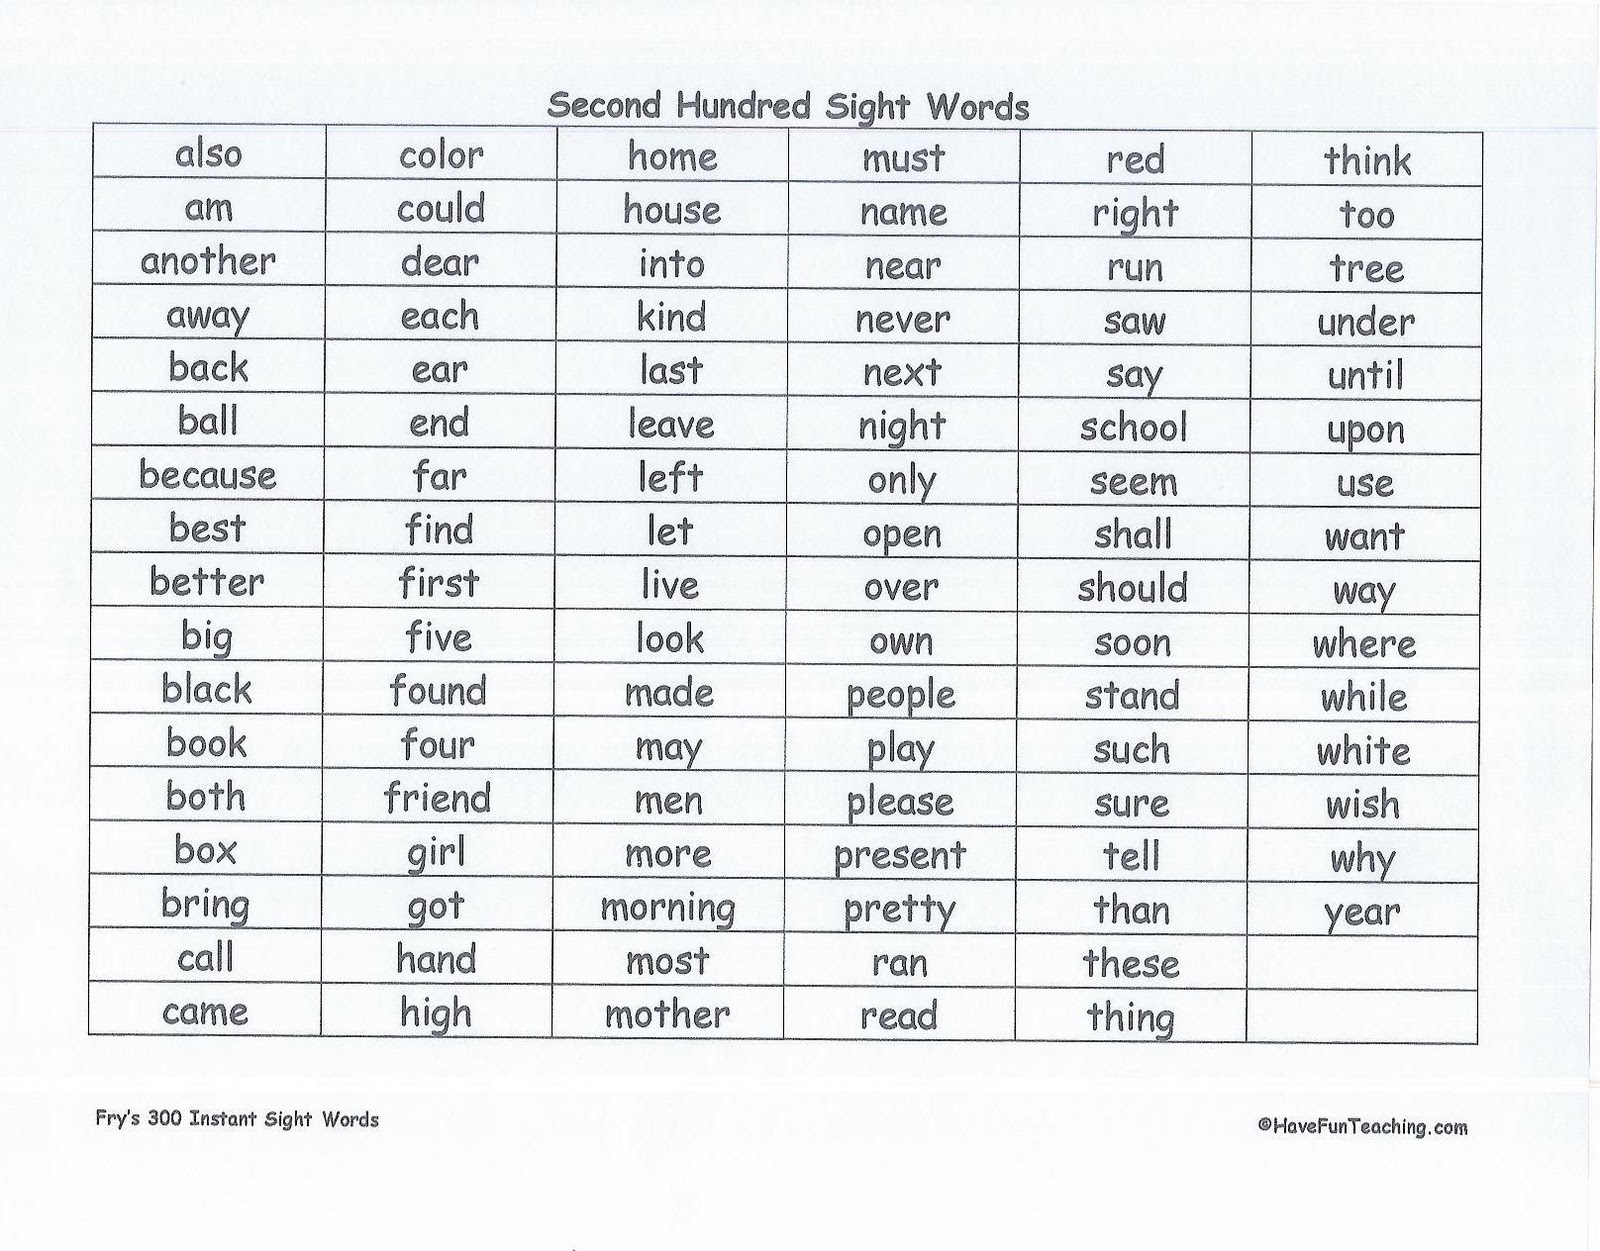 fantastic-fourth-grade-fry-s-300-instant-sight-word-list